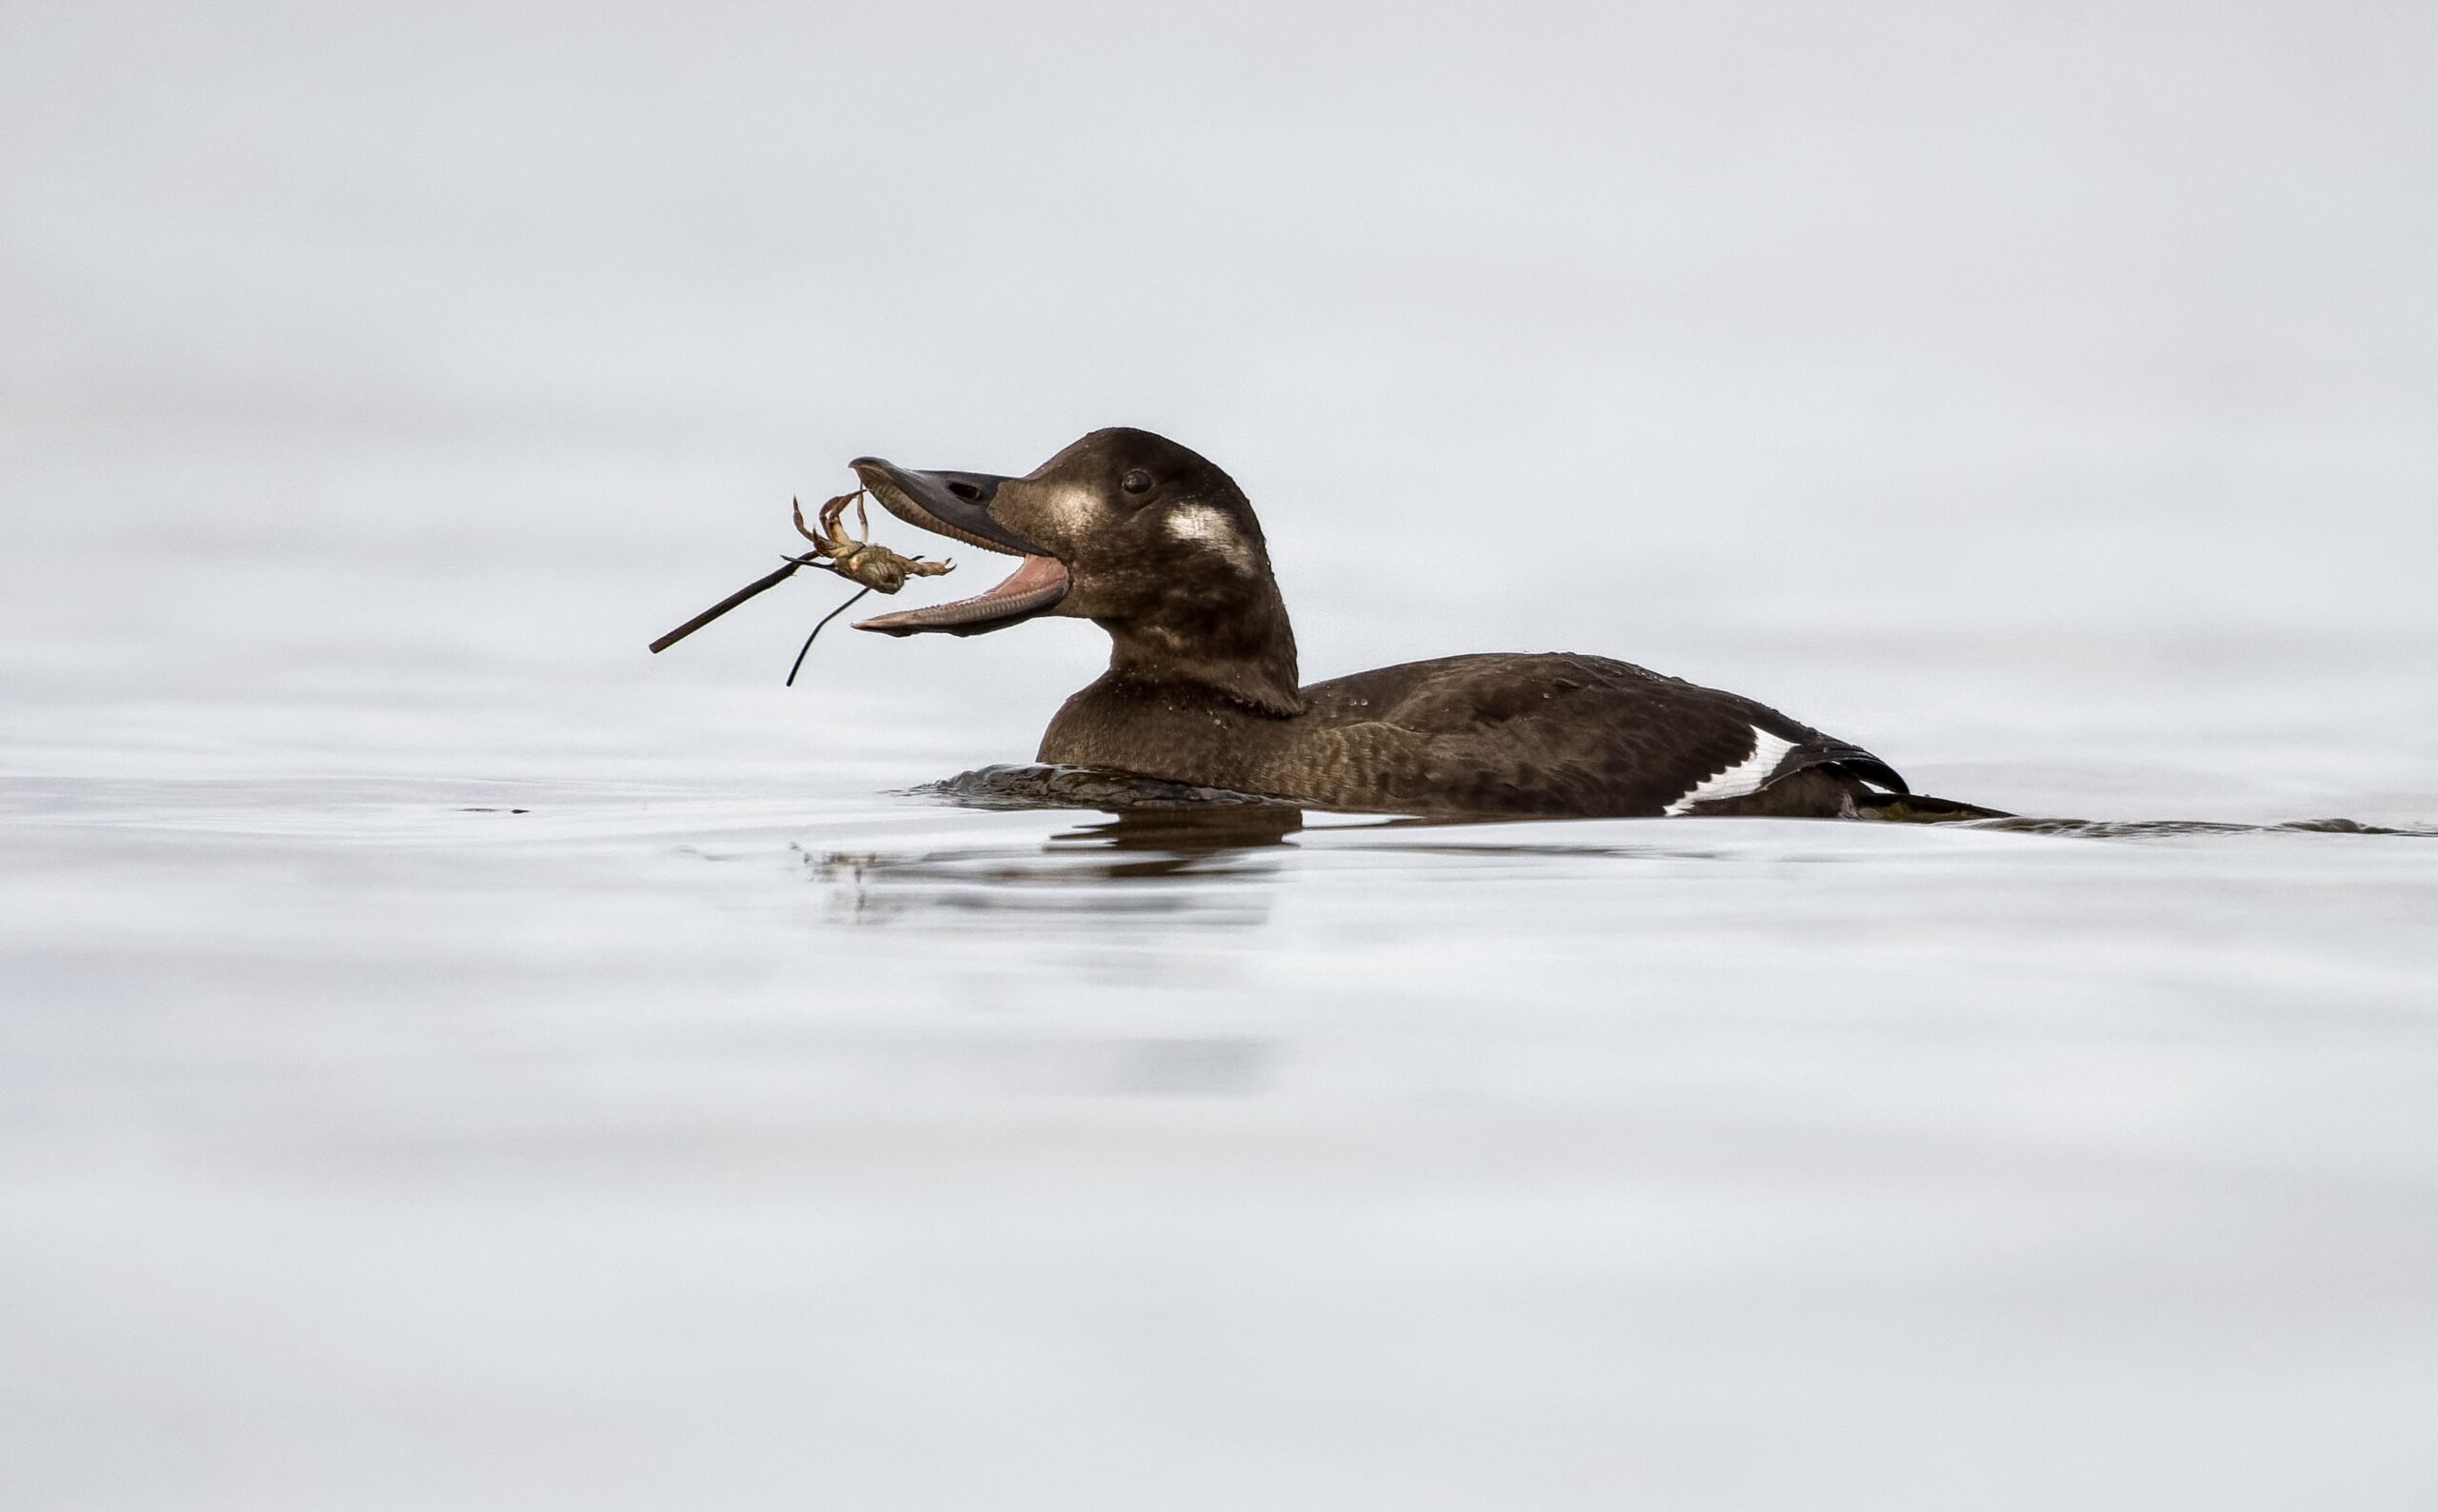 A black bird with white markings sits on the water and gulps down a crustacean.